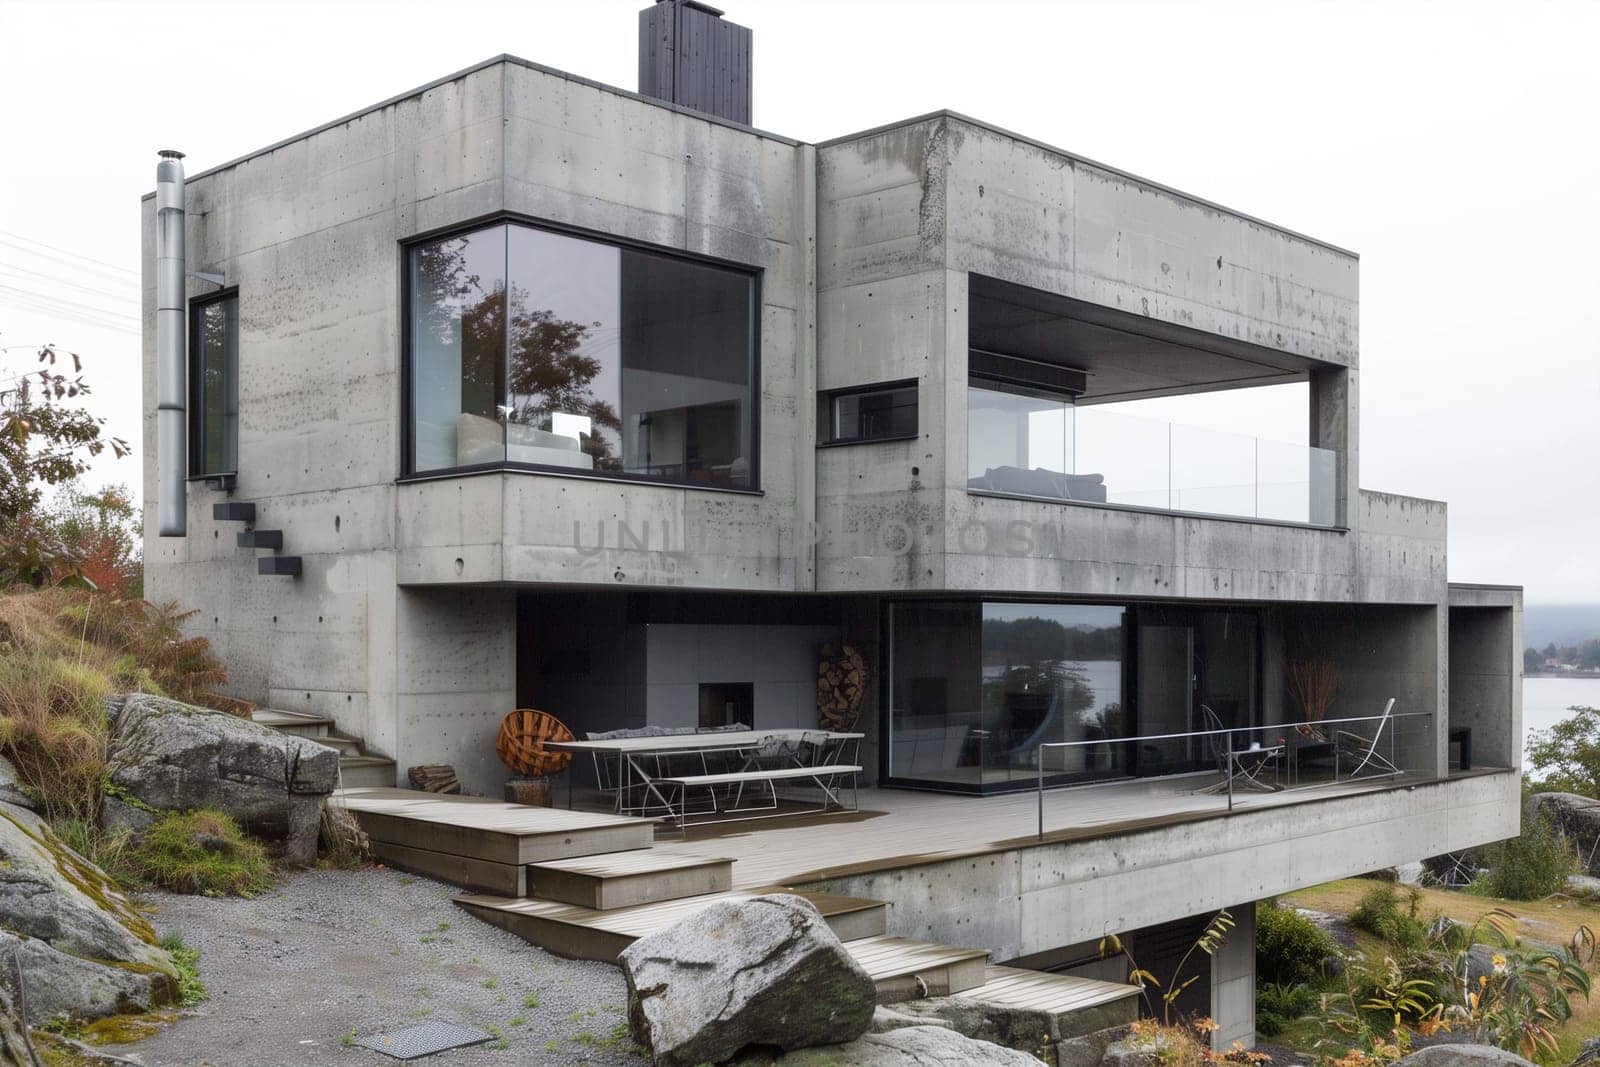 A concrete house sits on a hill, offering views of a body of water below. The house overlooks the tranquil waters, creating a picturesque scene.